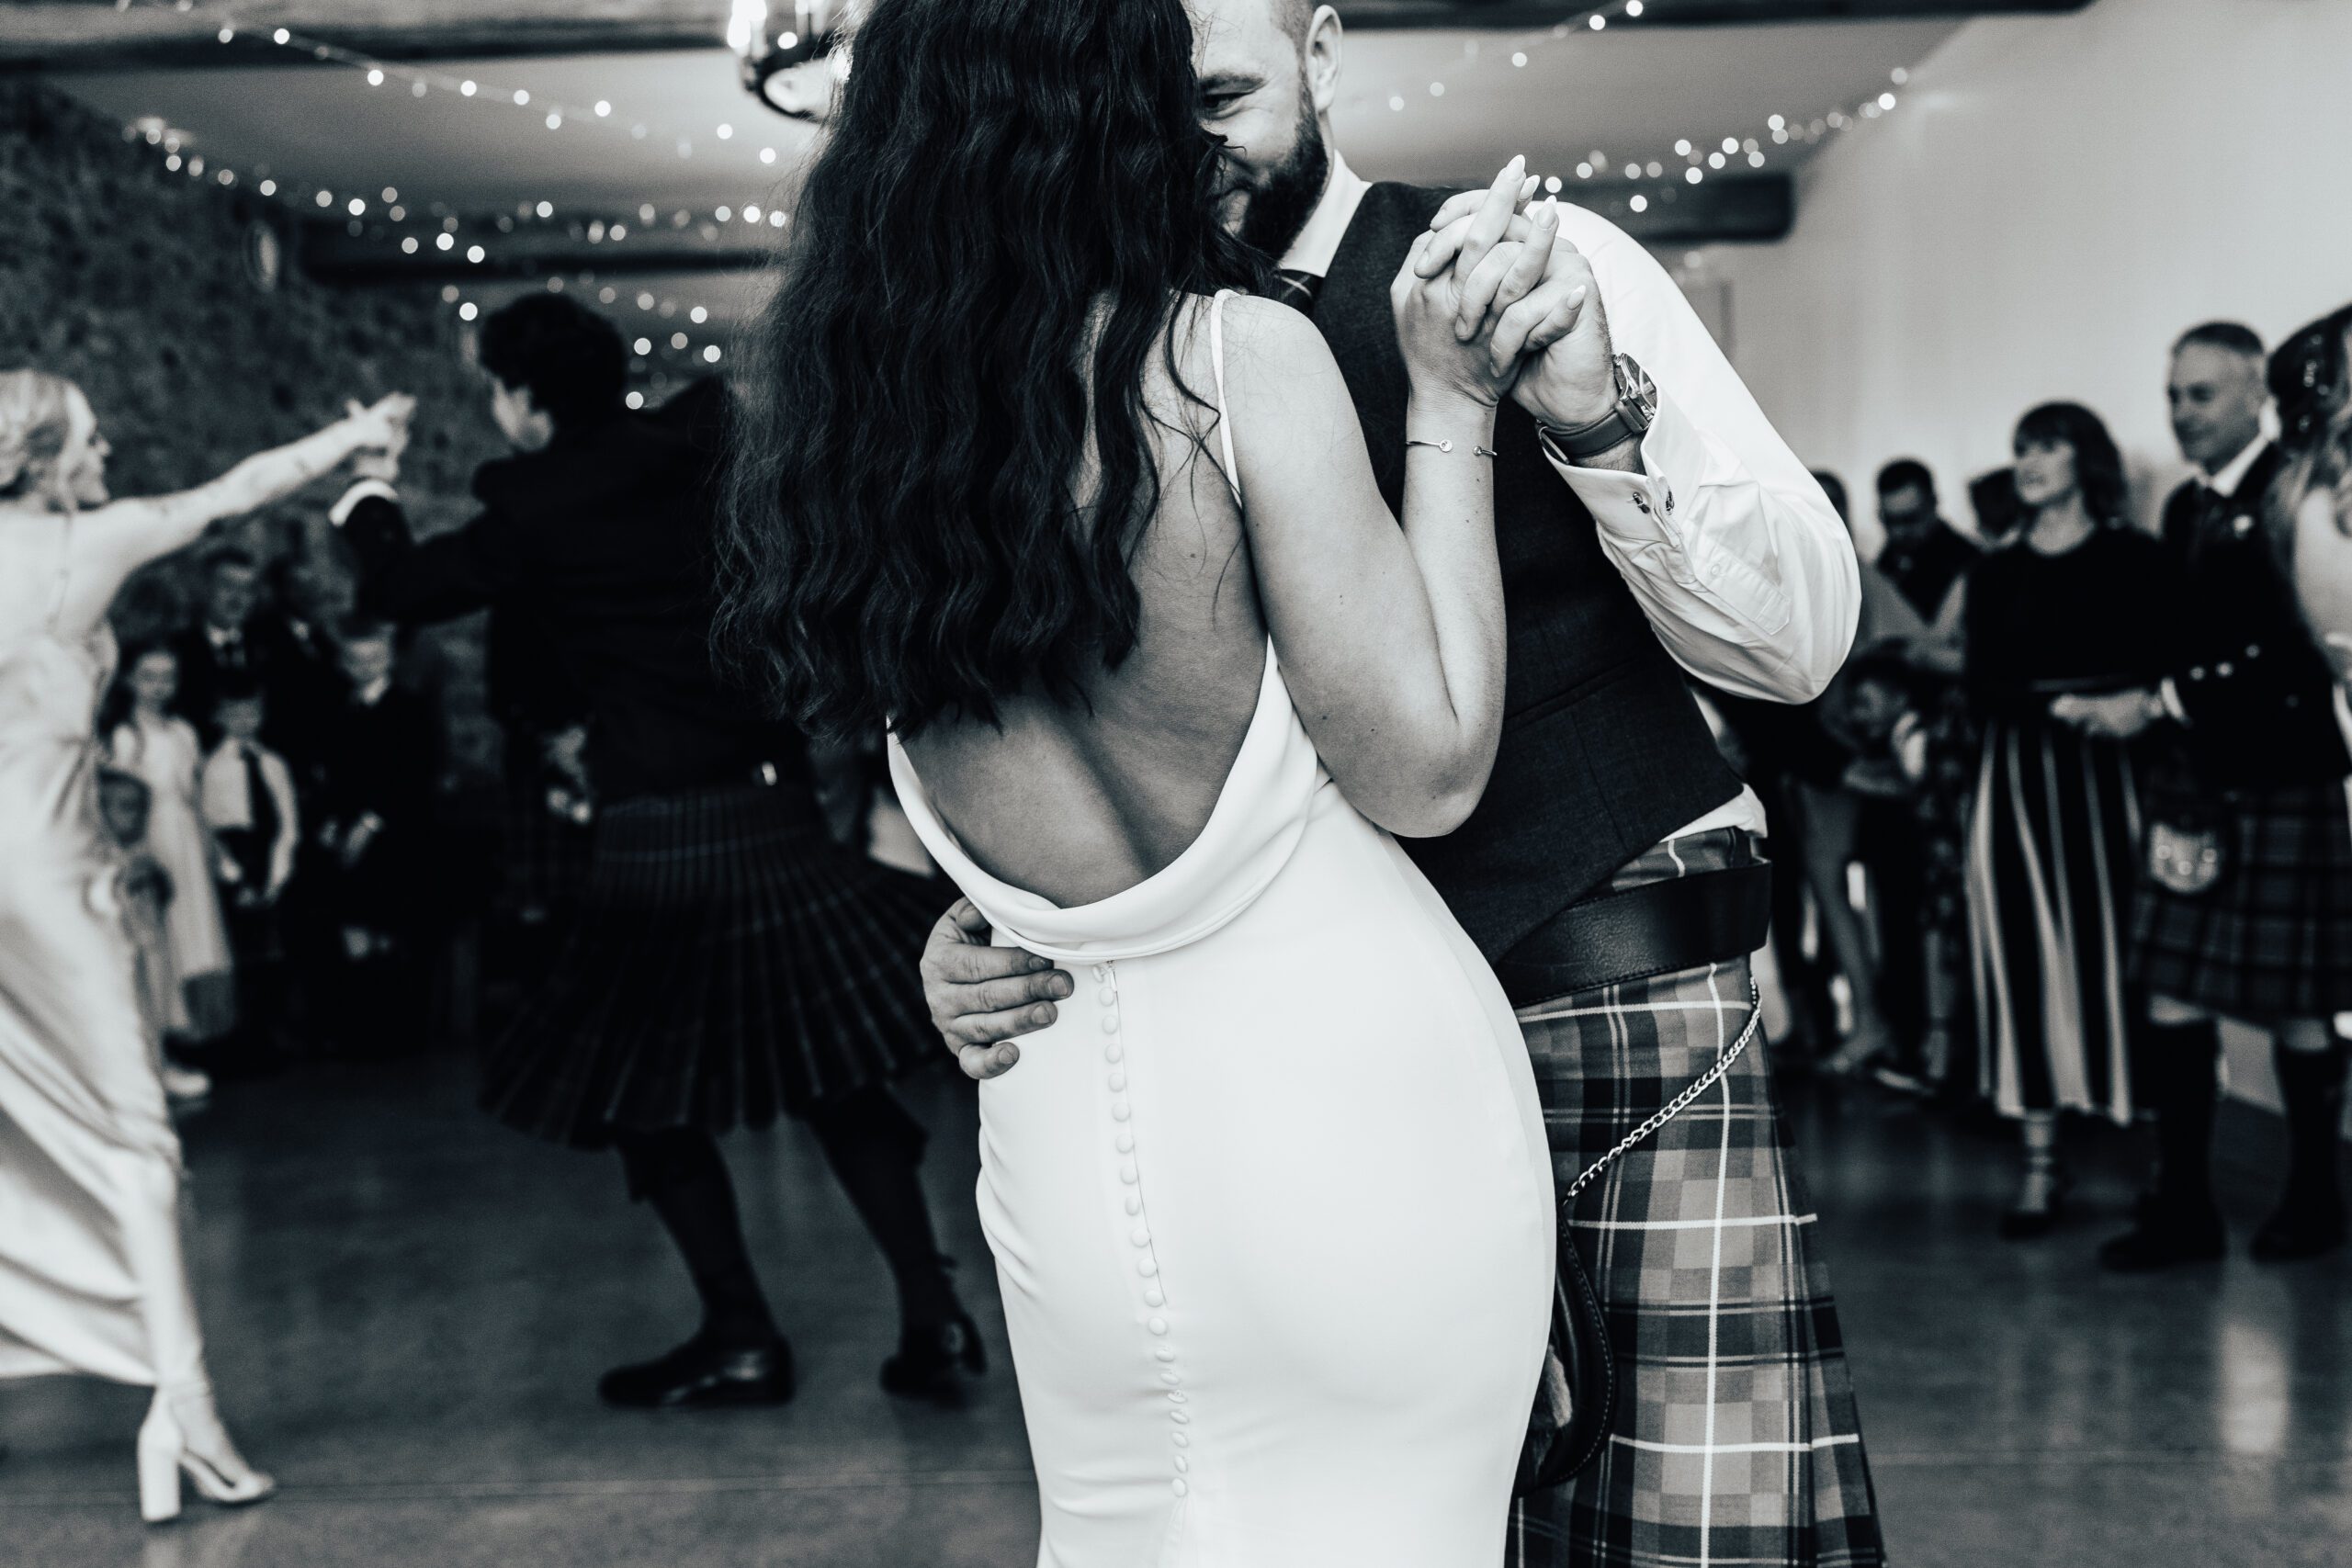 Couple embrace during their first dance on the timeless natural wedding day image shows the back of brides dress